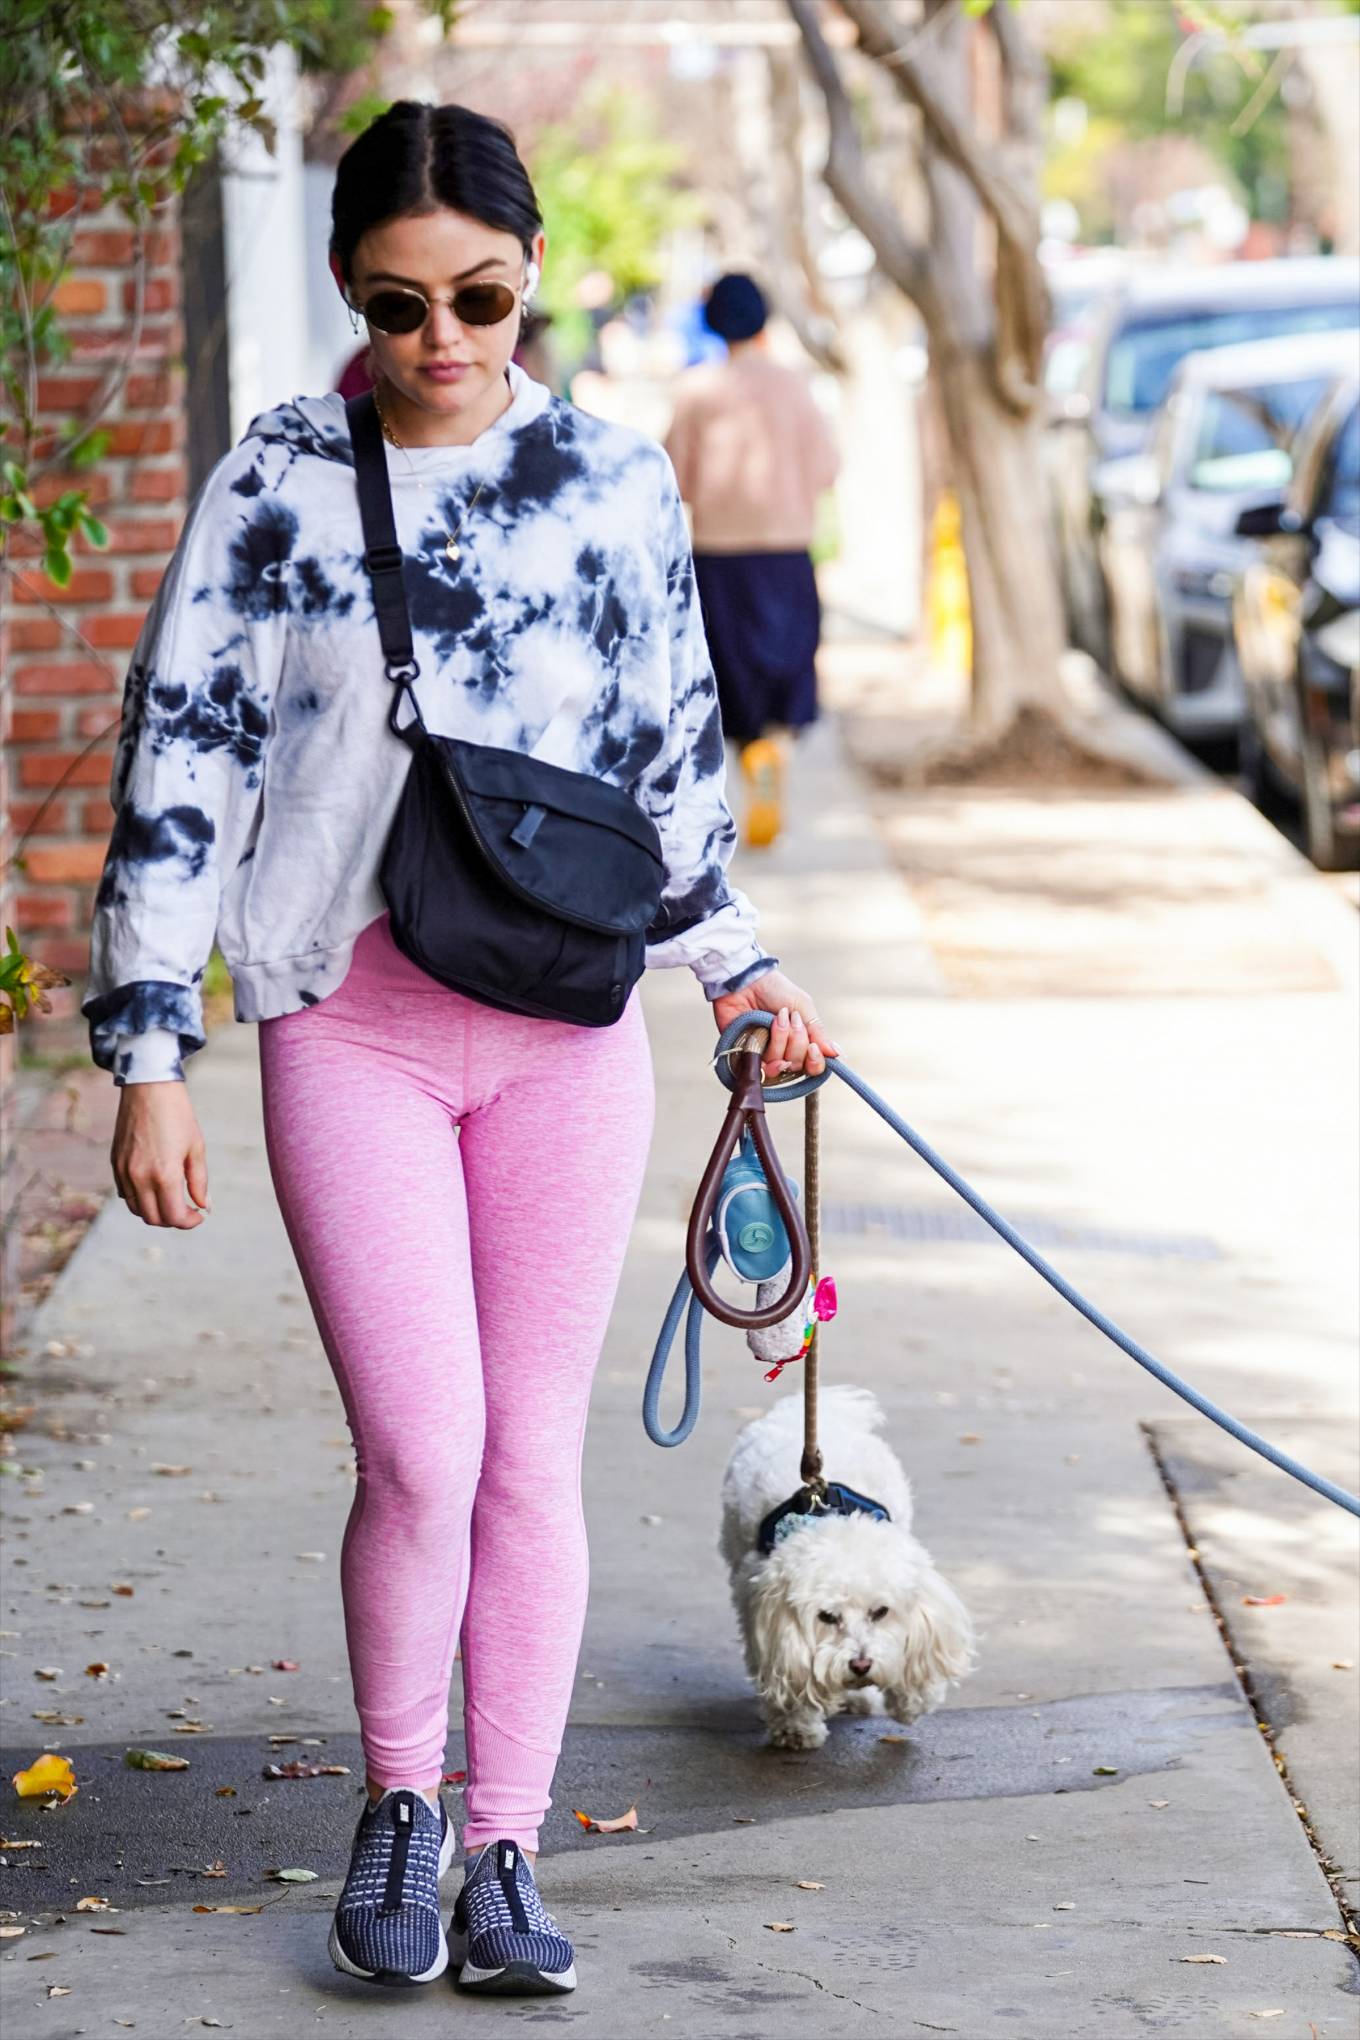 Lucy Hale 2022 : Lucy Hale – Steps out for a dogs walk in Studio City-07